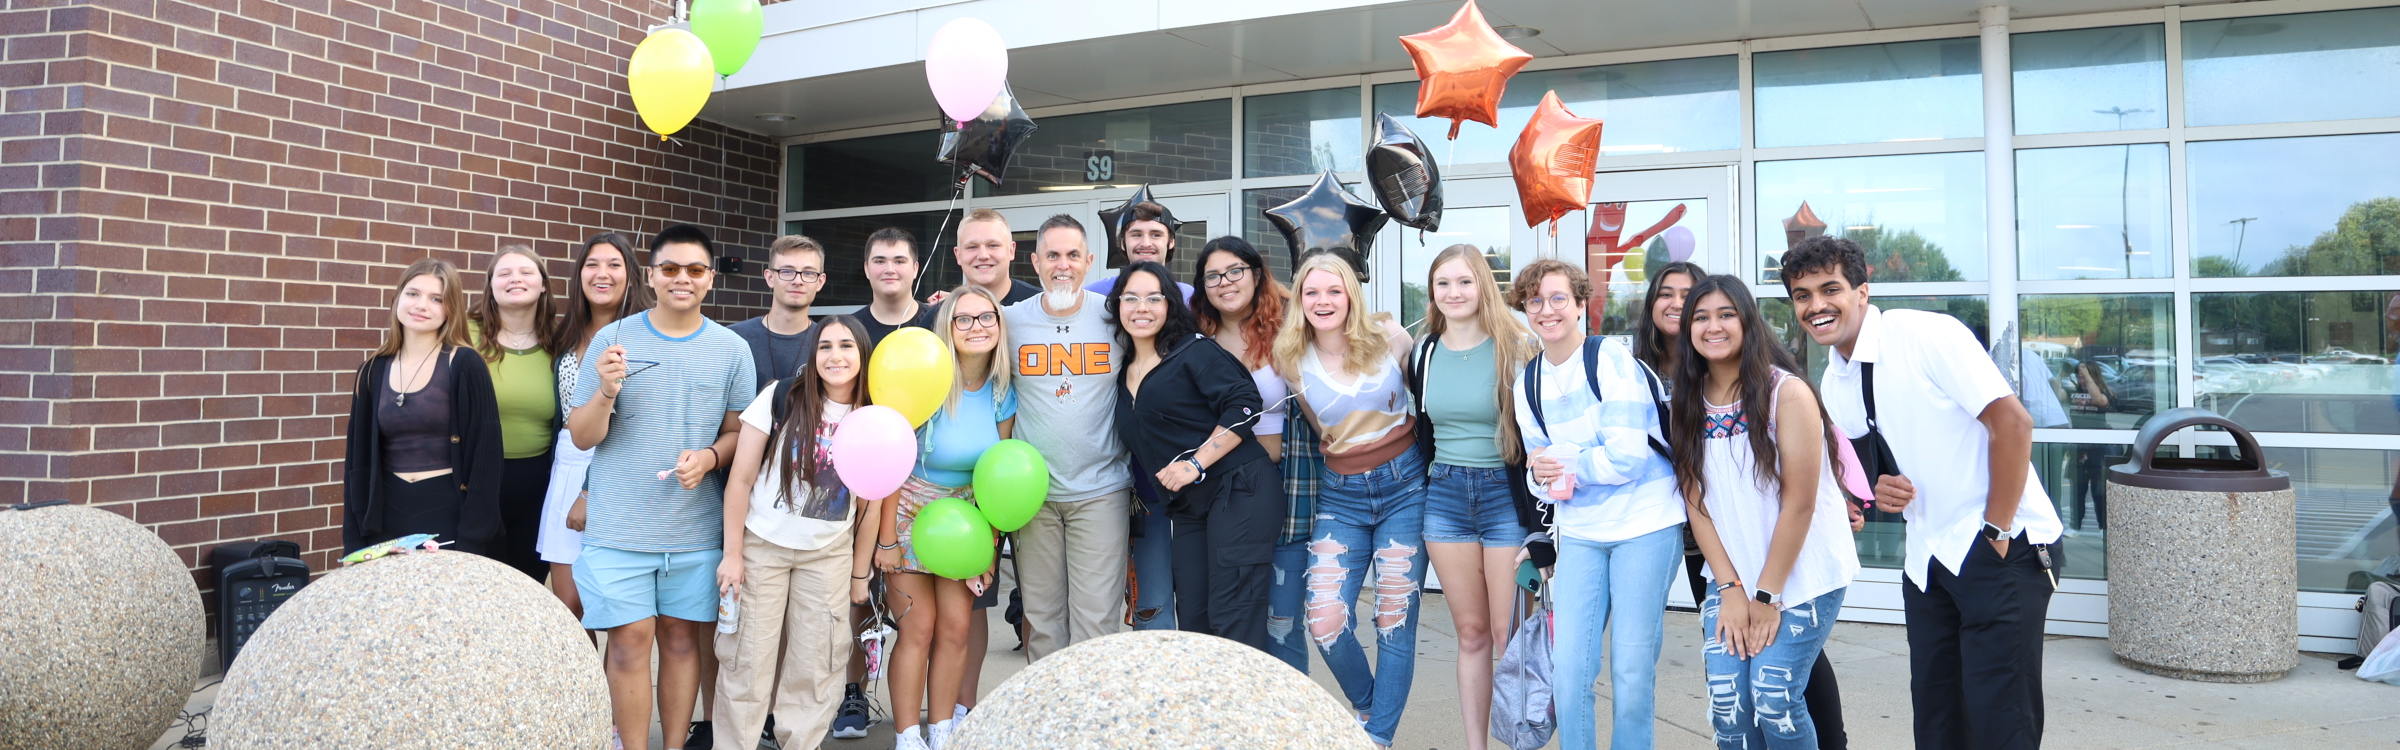 Students posing in front of the student entrance with balloons on the first day of school